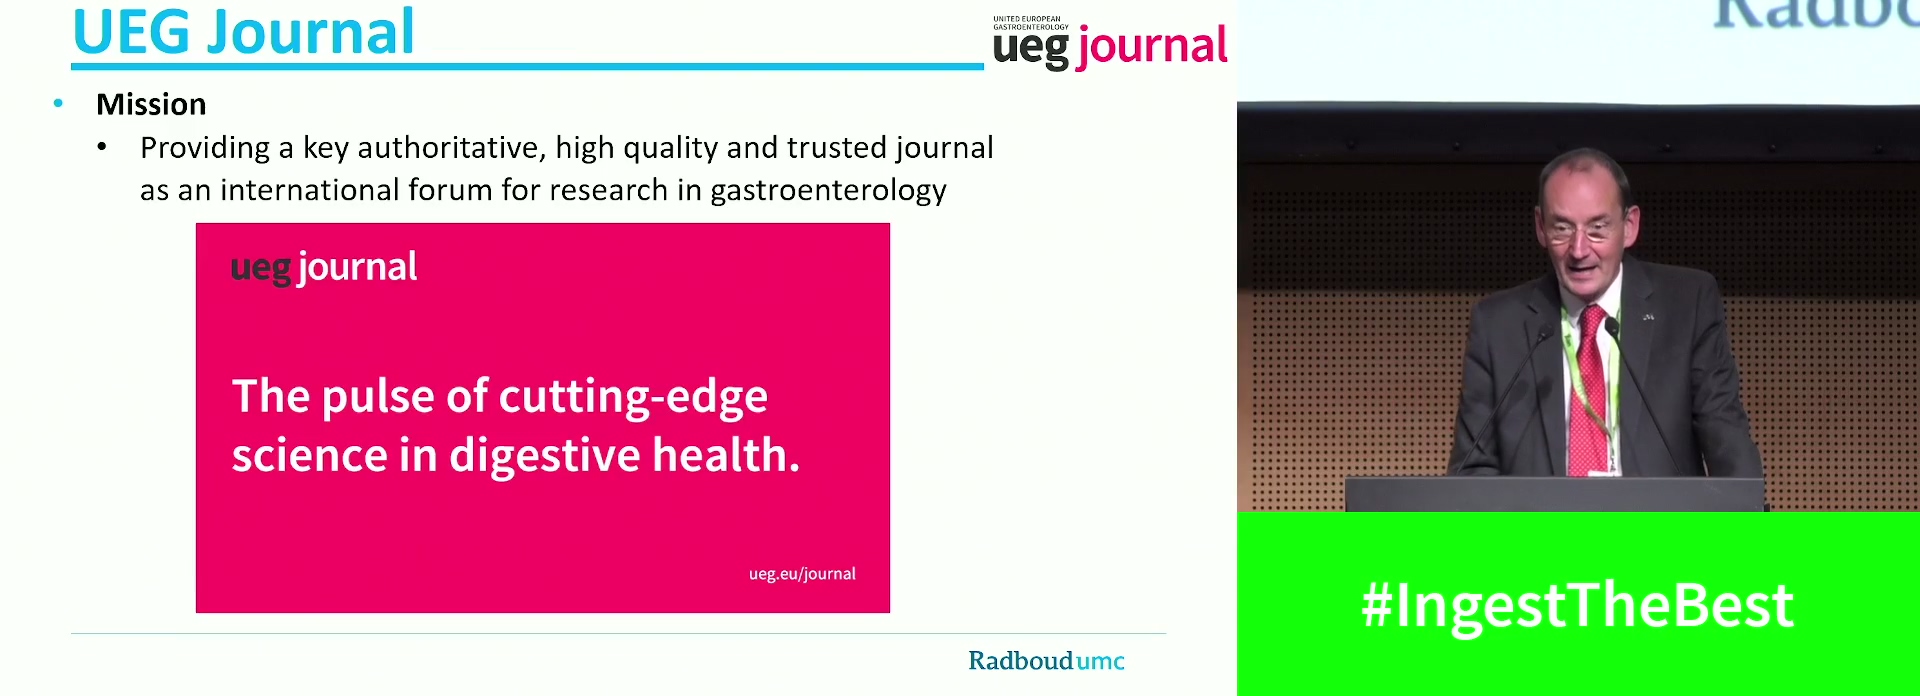 UEG Journal: The story of success